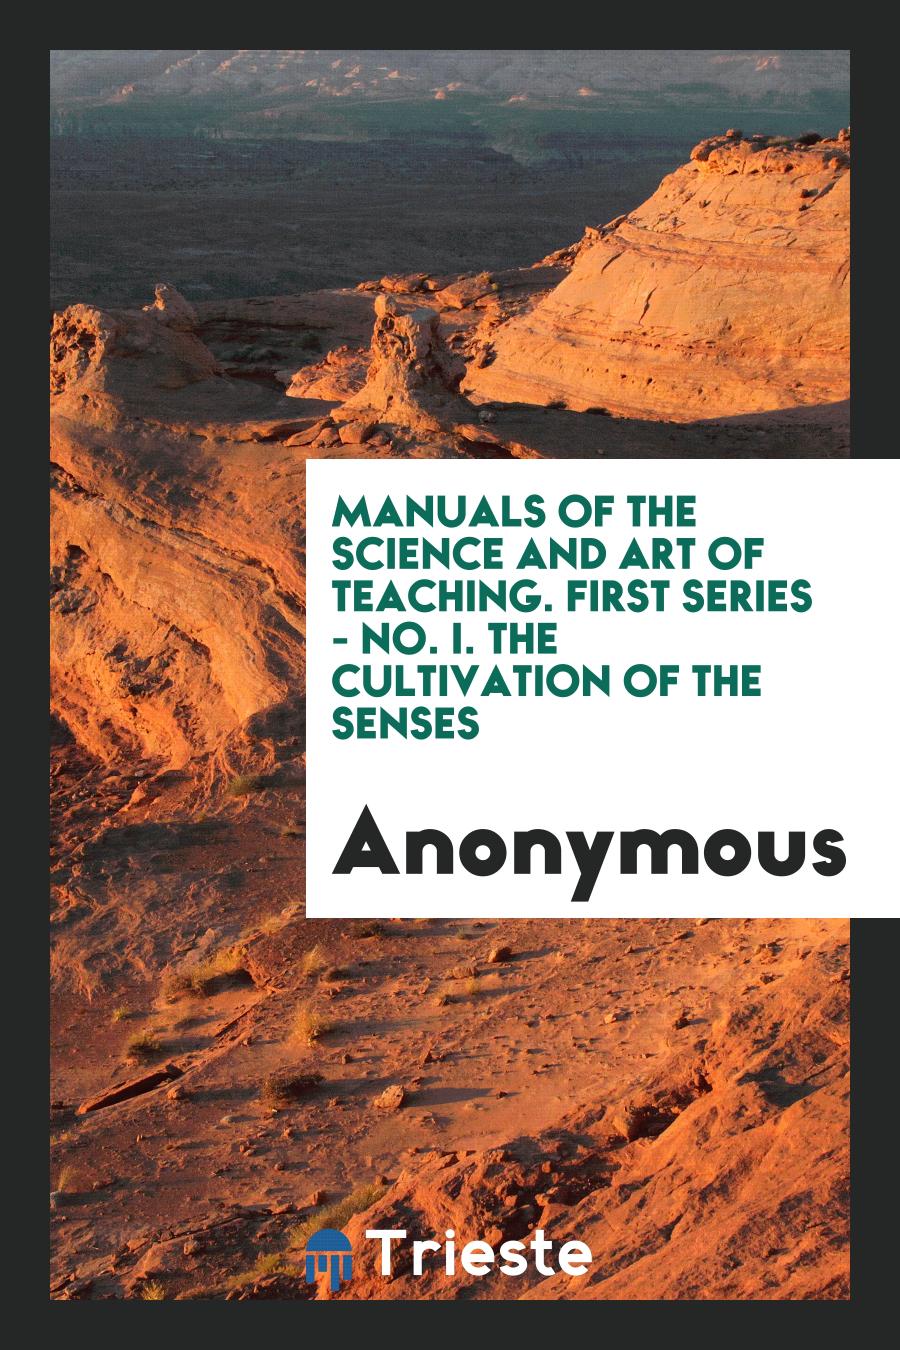 Manuals of the science and art of teaching. First series - No. I. The cultivation of the senses